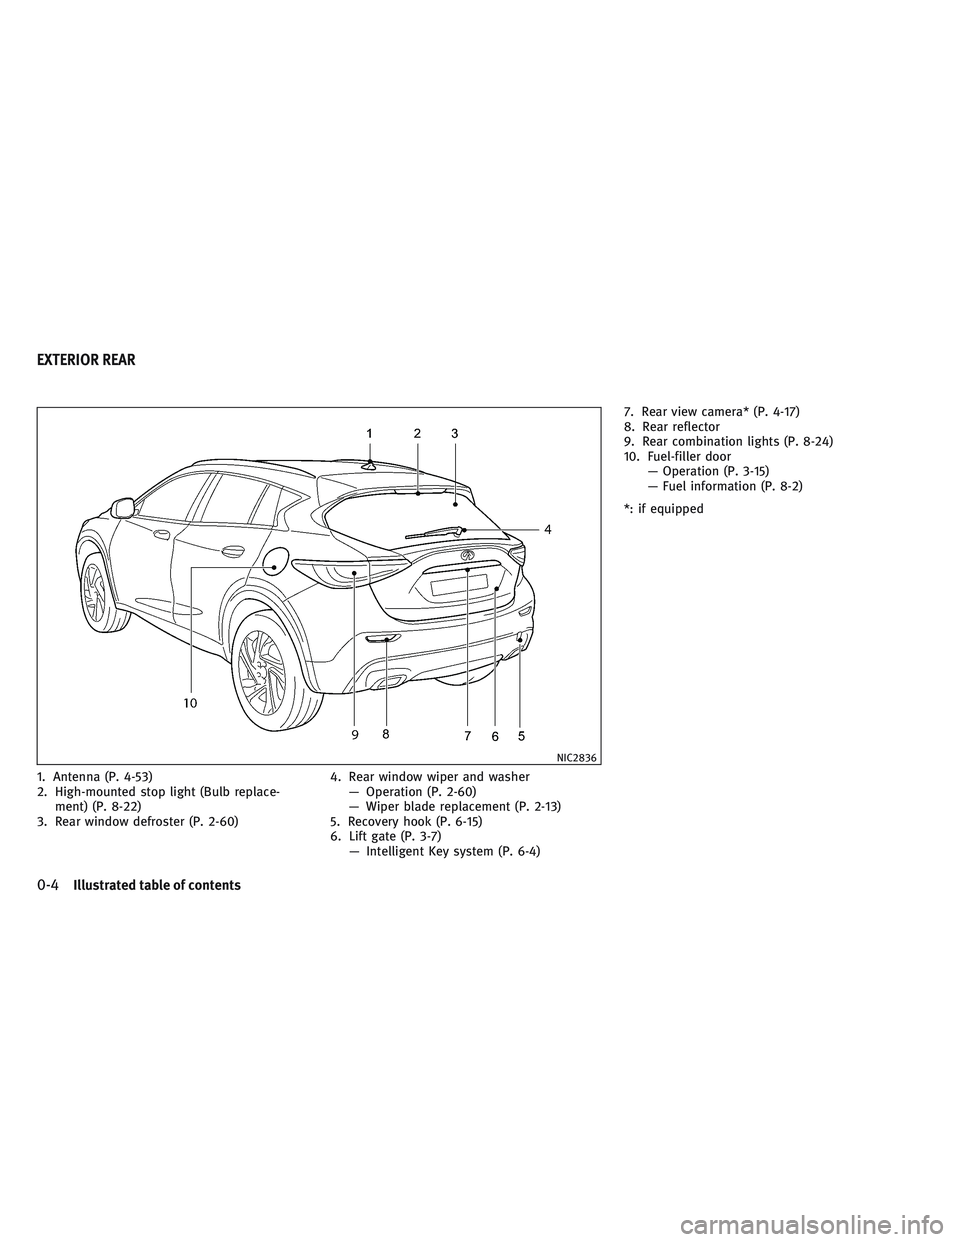 INFINITI QX30 2017  Owners Manual 1. Antenna (P. 4-53)
2. High-mounted stop light (Bulb replace-
ment) (P. 8-22)
3. Rear window defroster (P. 2-60)4. Rear window wiper and washer
— Operation (P. 2-60)
— Wiper blade replacement (P.